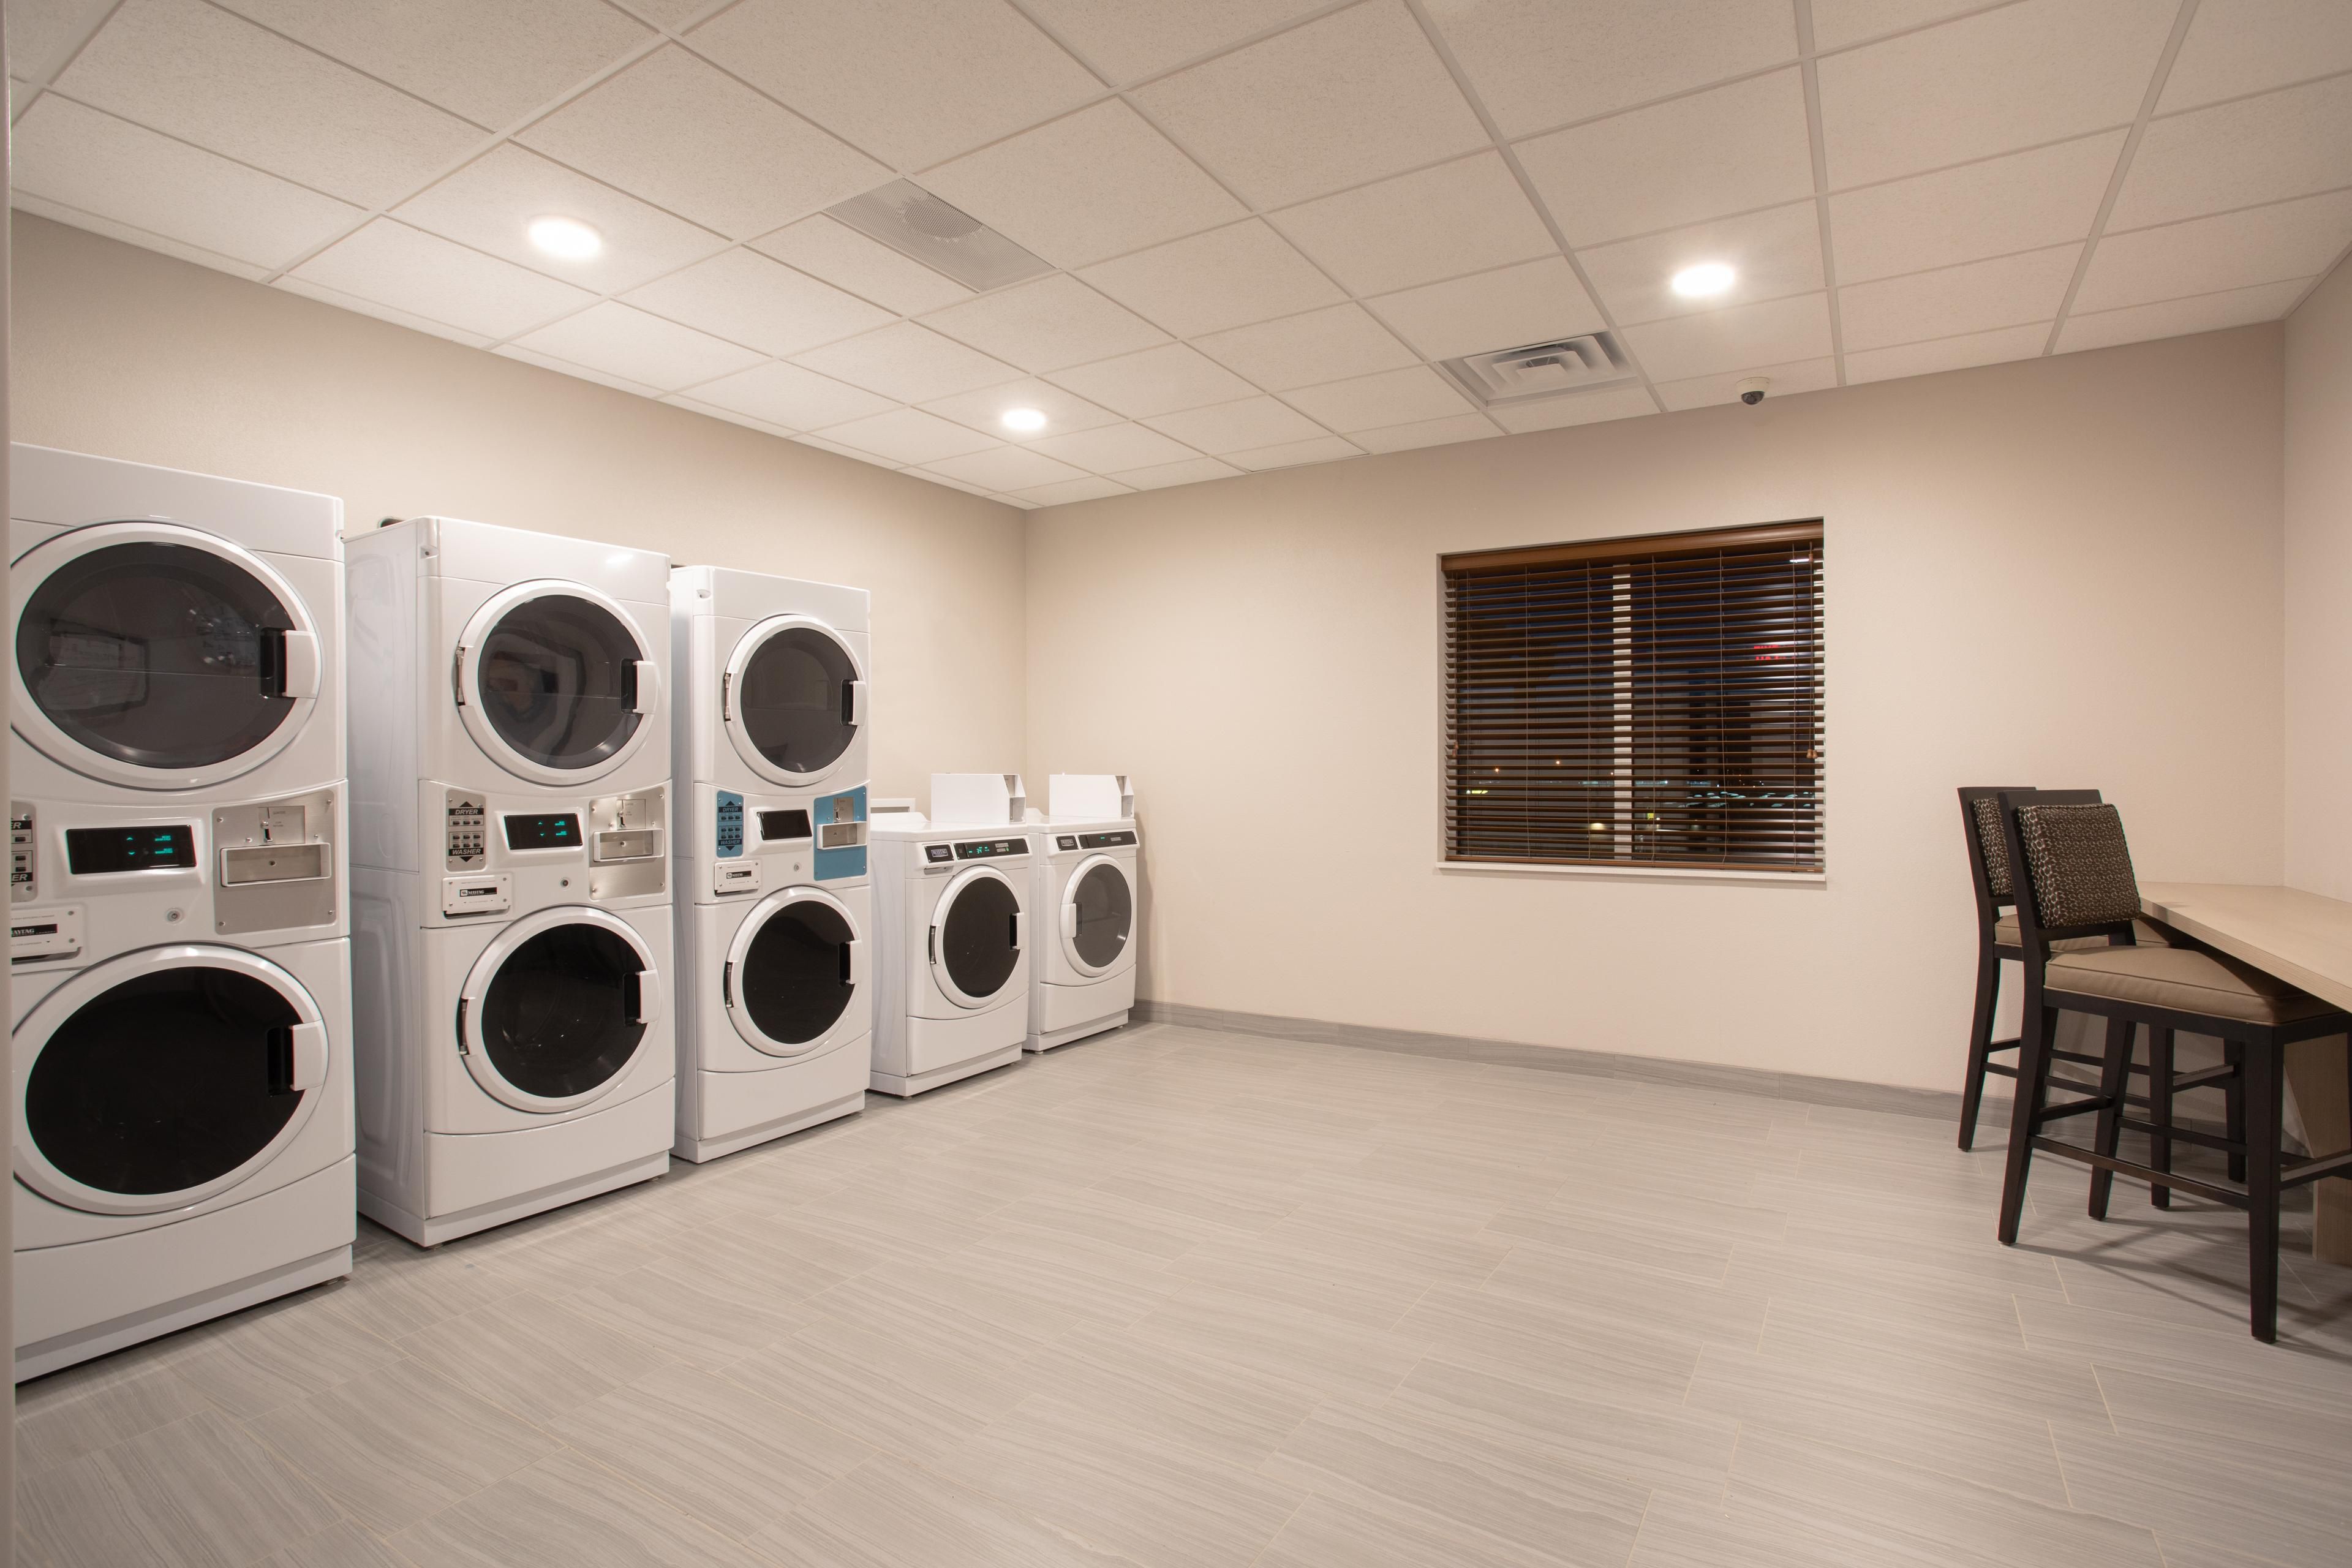 The hotel offers a complimentary guest laundry facility that can be accessed 24-hours a day! Just add some soap, softener and dryer sheets and you are well on your way to fresh, clean laundry!